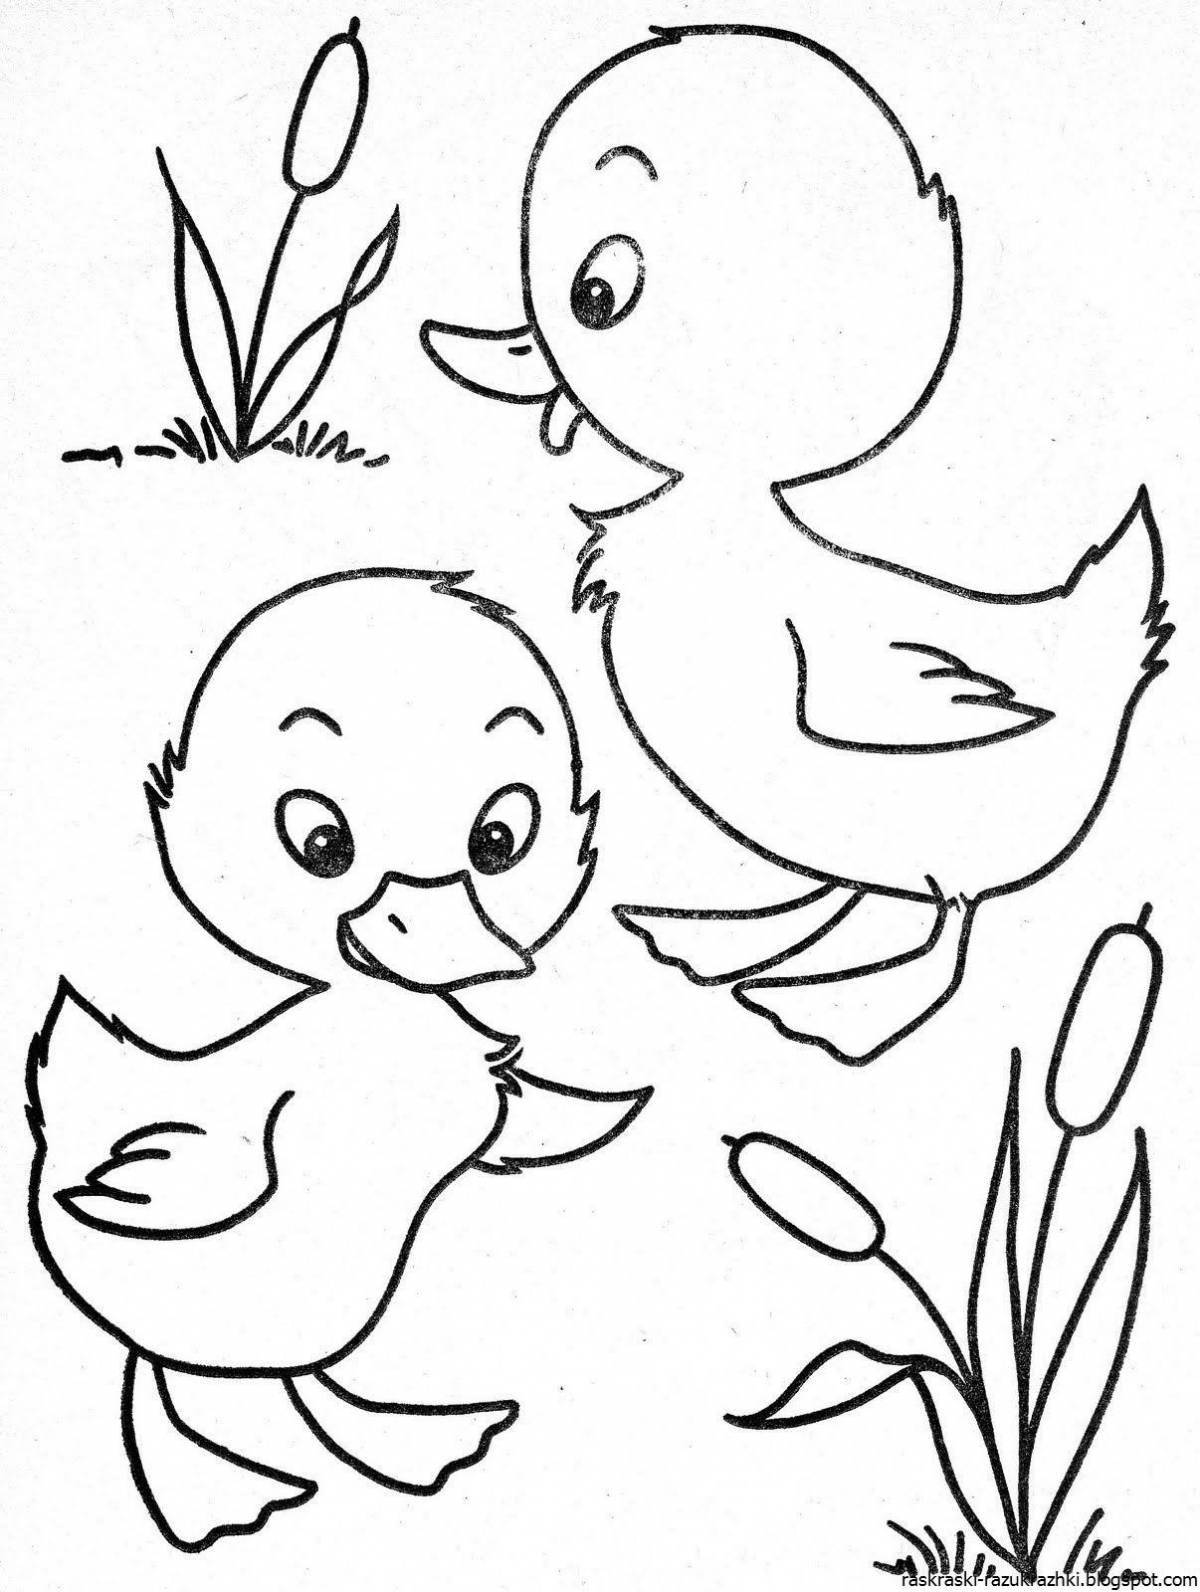 Chicken and duckling coloring book